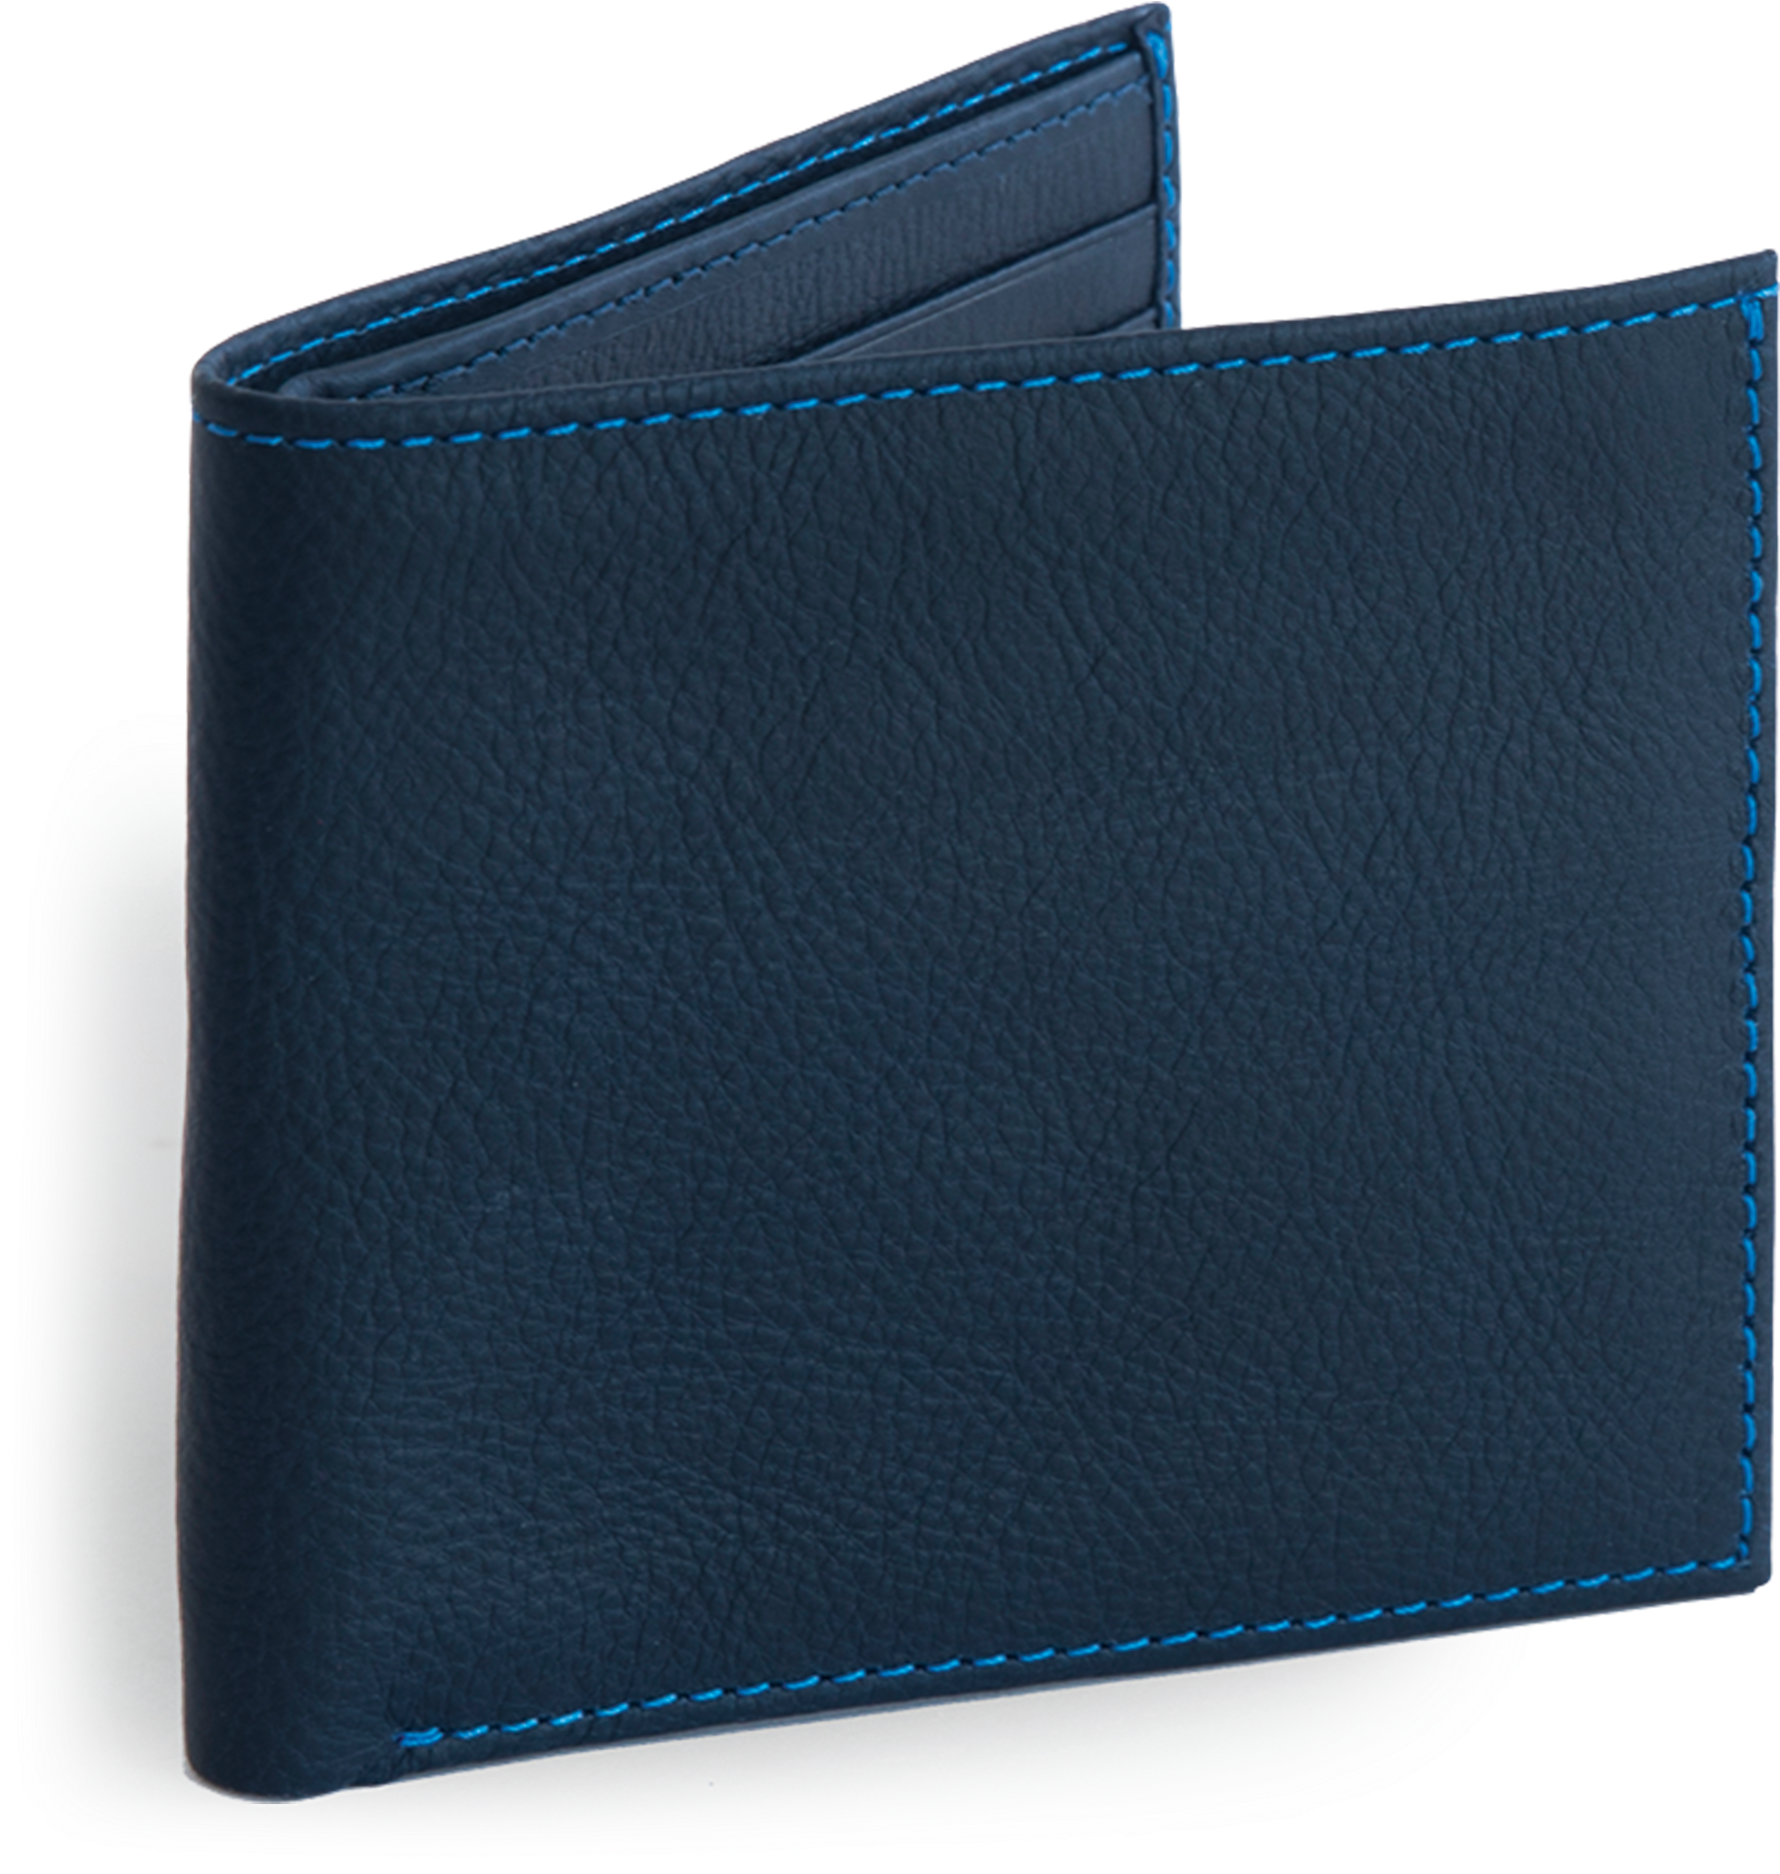 Blue Leather Wallet Blue Stitching PNG